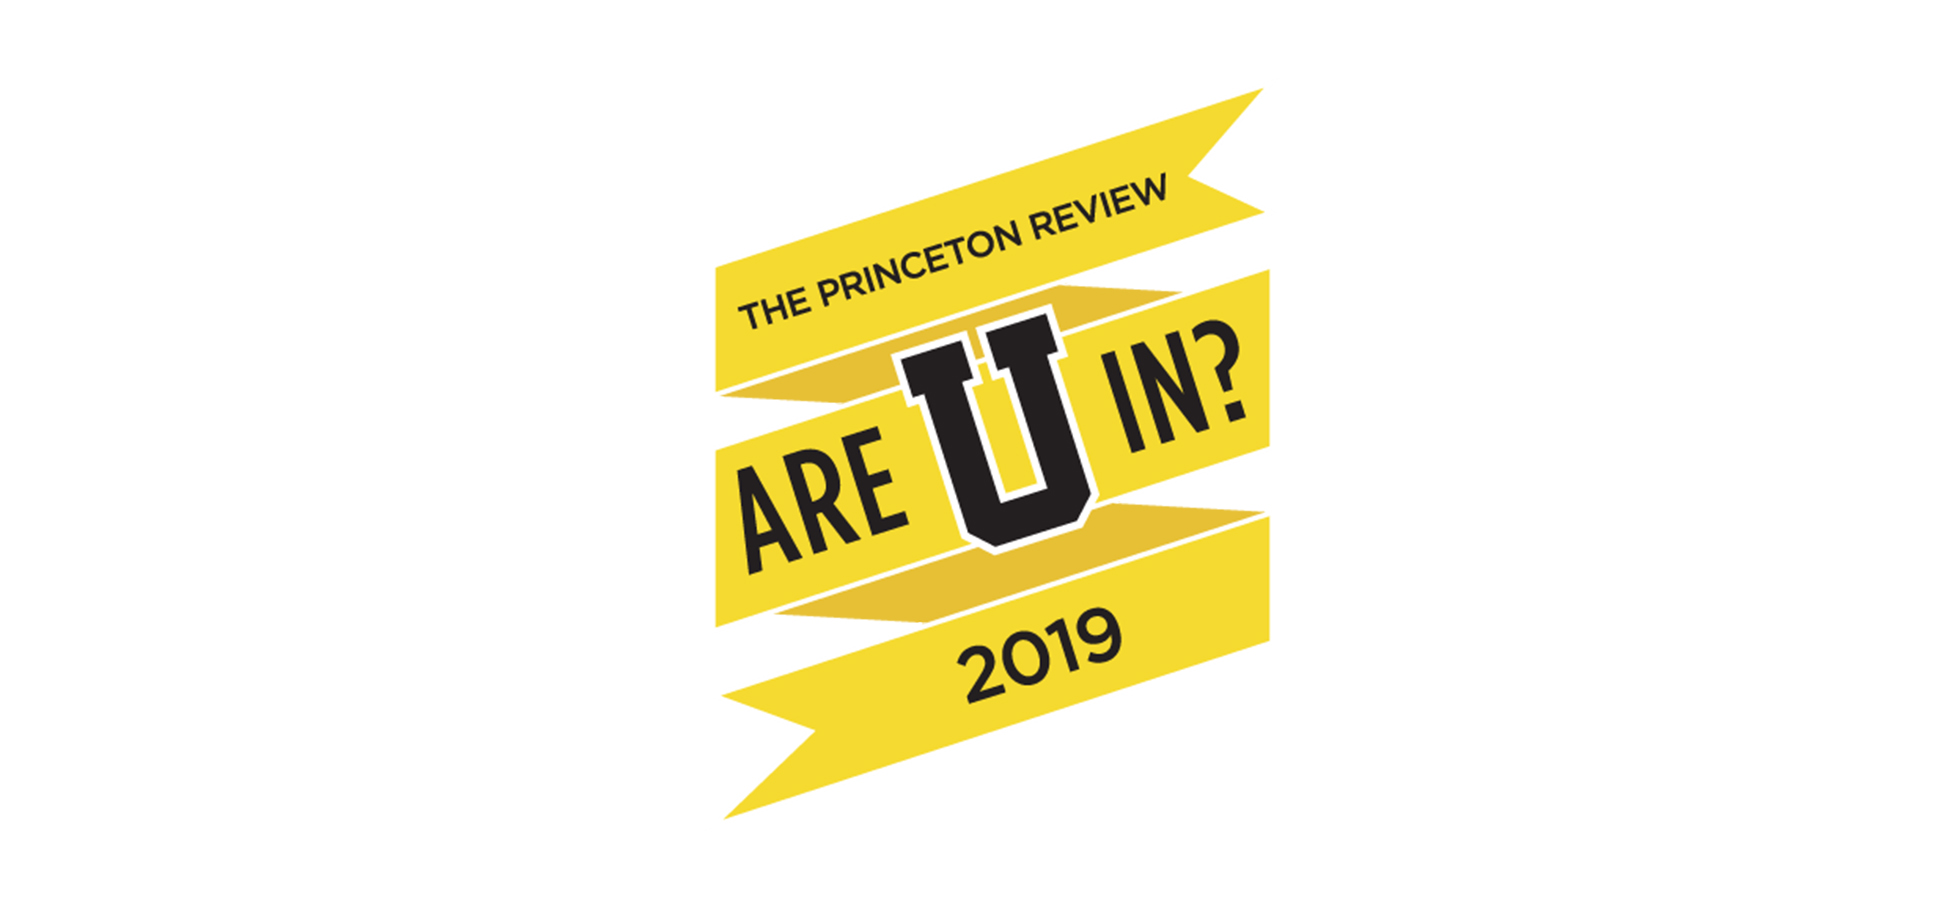 Assumption Ranked Among The Princeton Review’s Best 384 Colleges for 2019